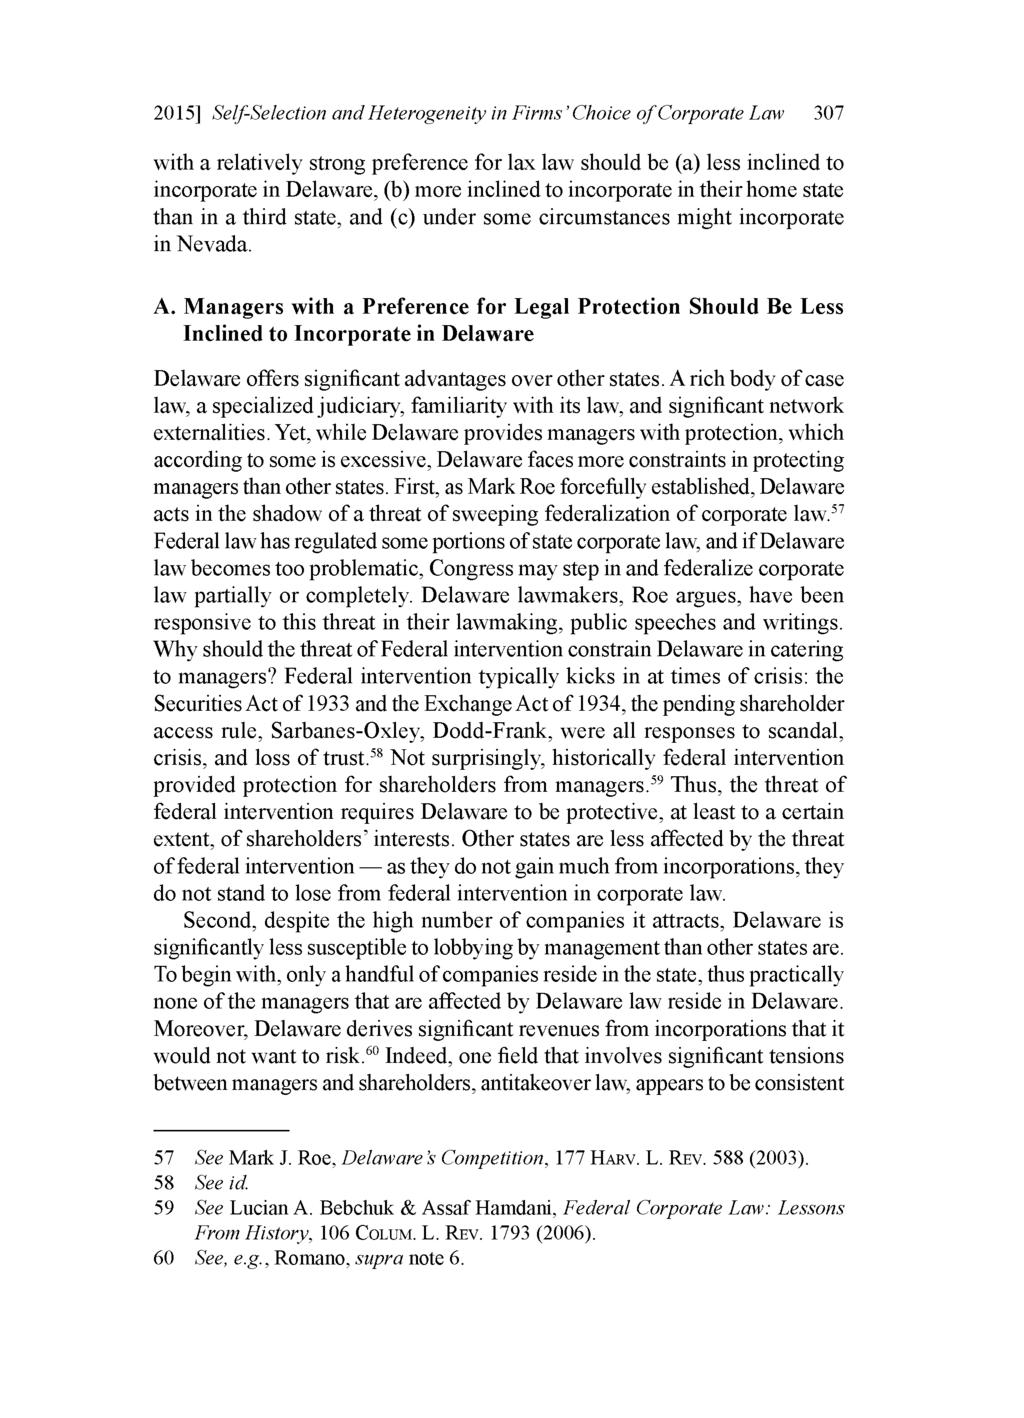 2015] Self-Selection and Heterogeneity in Firms 'Choice of Corporate Law 307 with a relatively strong preference for lax law should be (a) less inclined to incorporate in Delaware, (b) more inclined